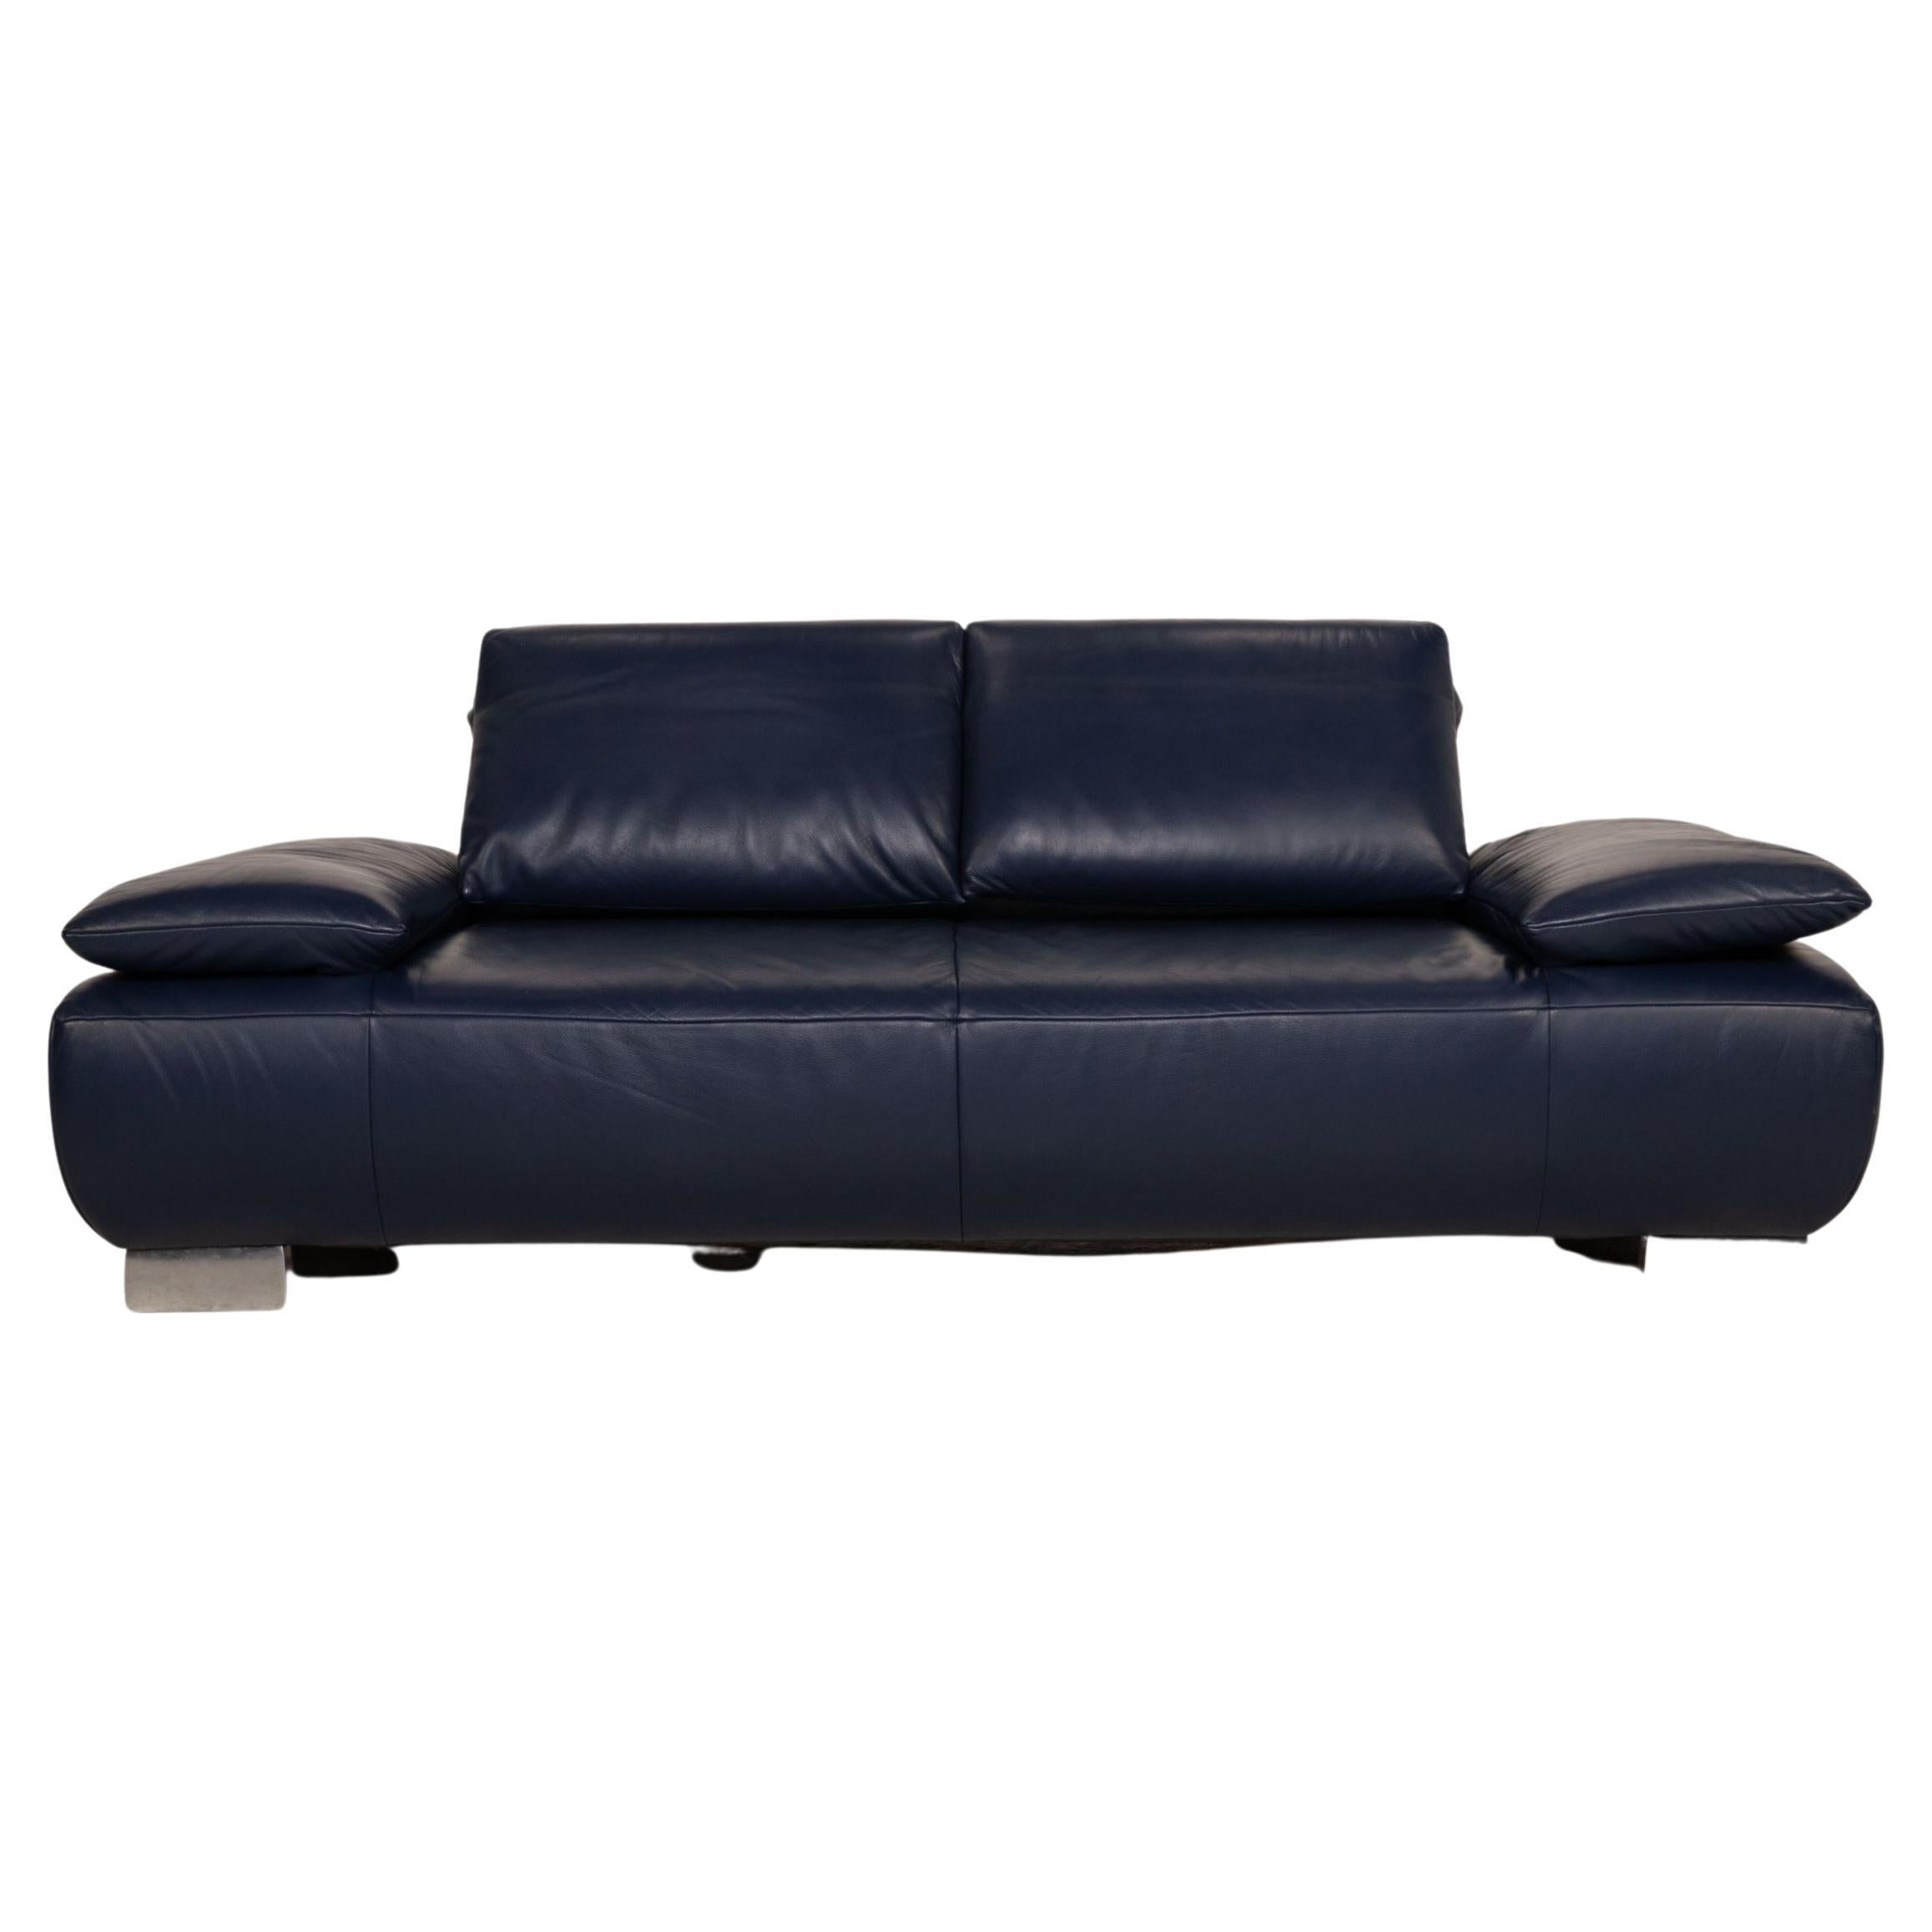 Koinor Volare Leather Sofa Blue Two Seater Couch Function For Sale